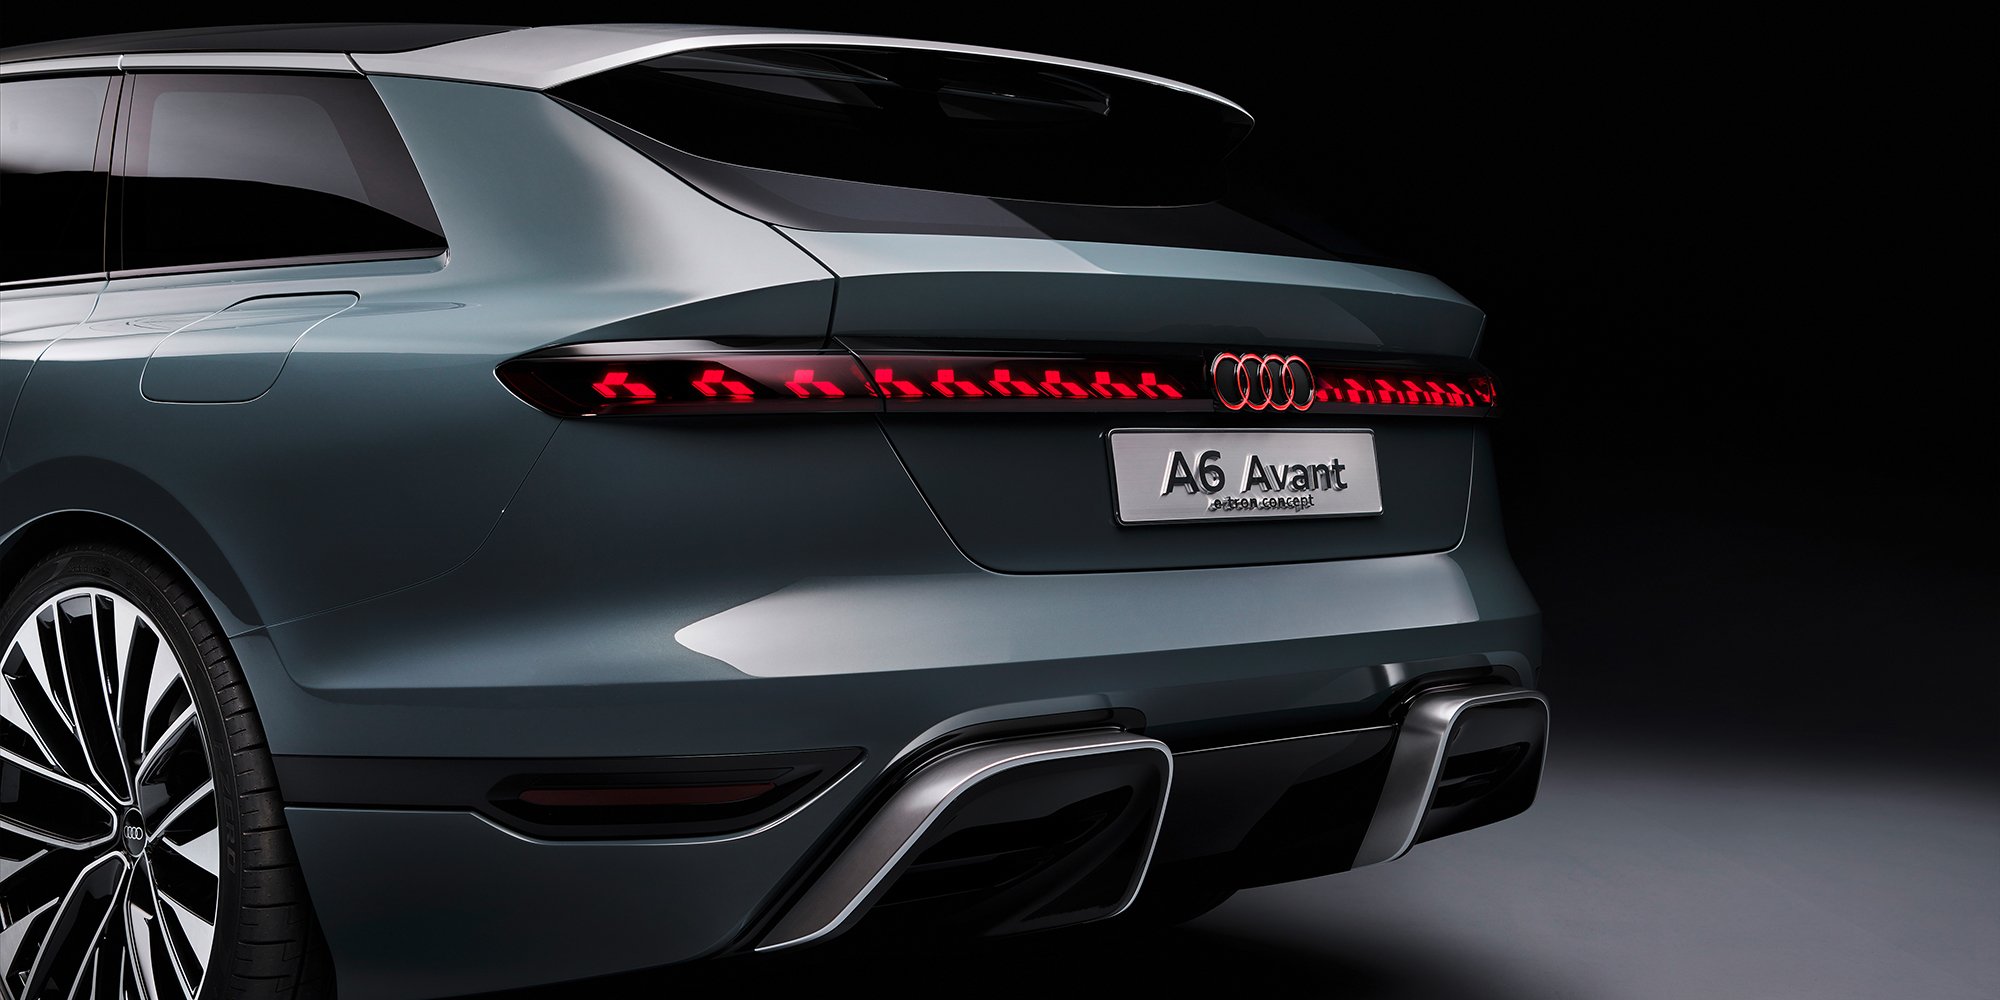 Audi unveils A6 Avant e-tron station wagon concept described as a 'storage  champ' with headlights that project a video game | Electrek